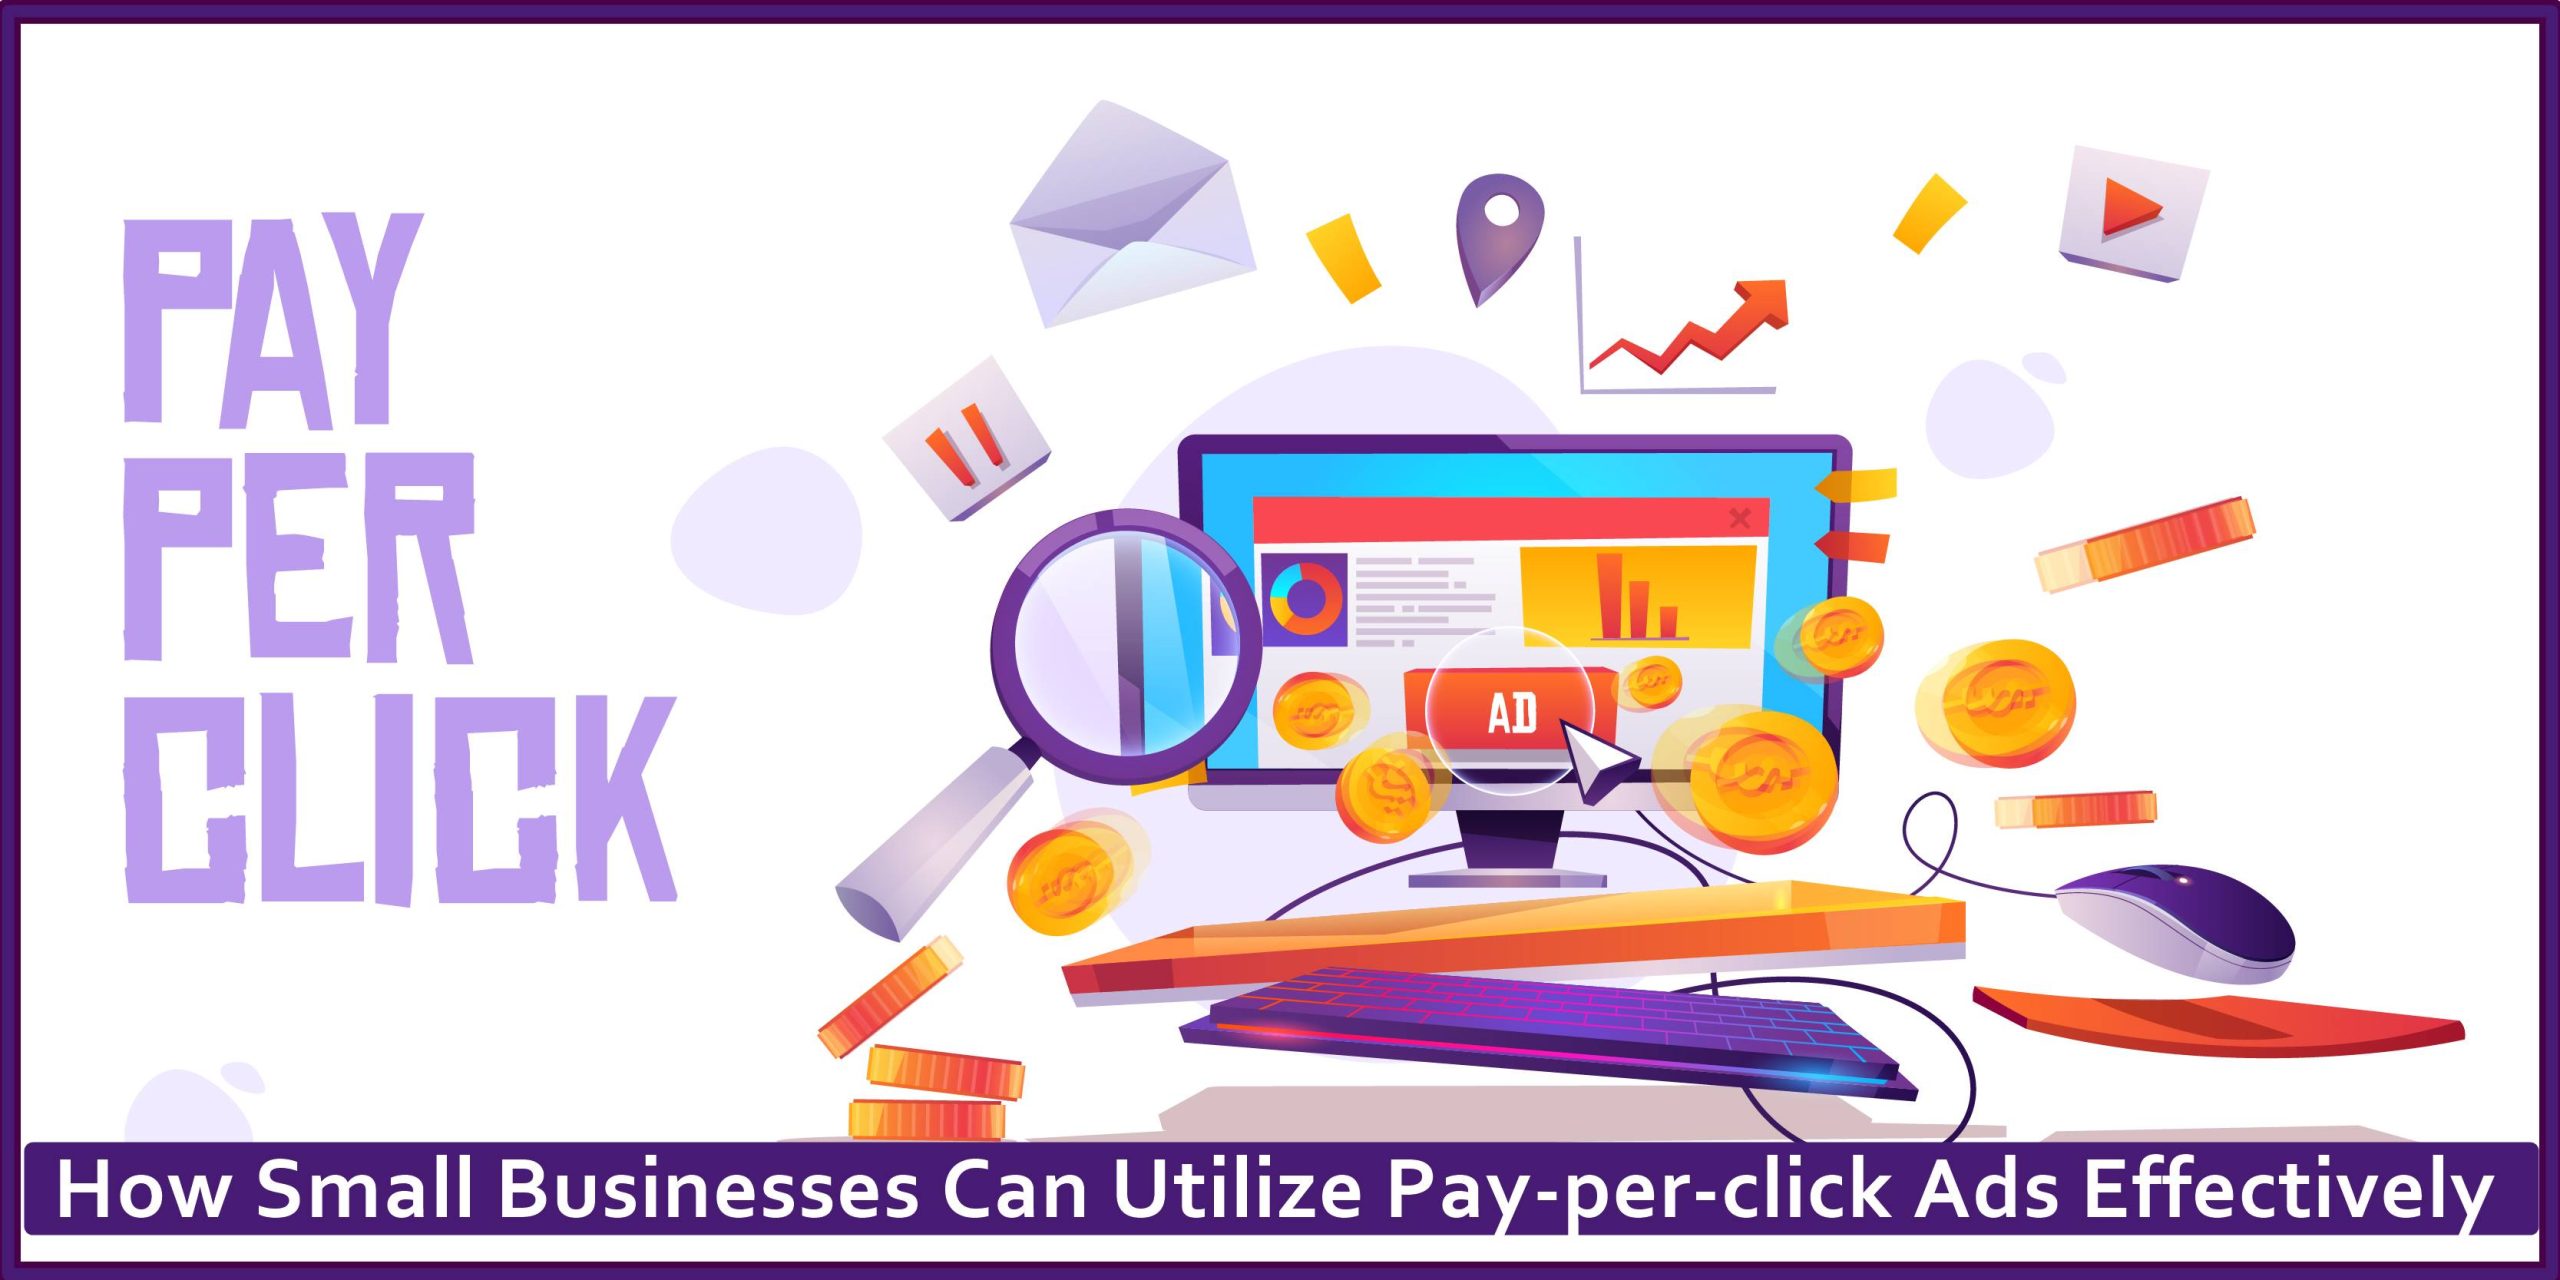 How Small Businesses Can Utilize Pay-per-click Ads Effectively